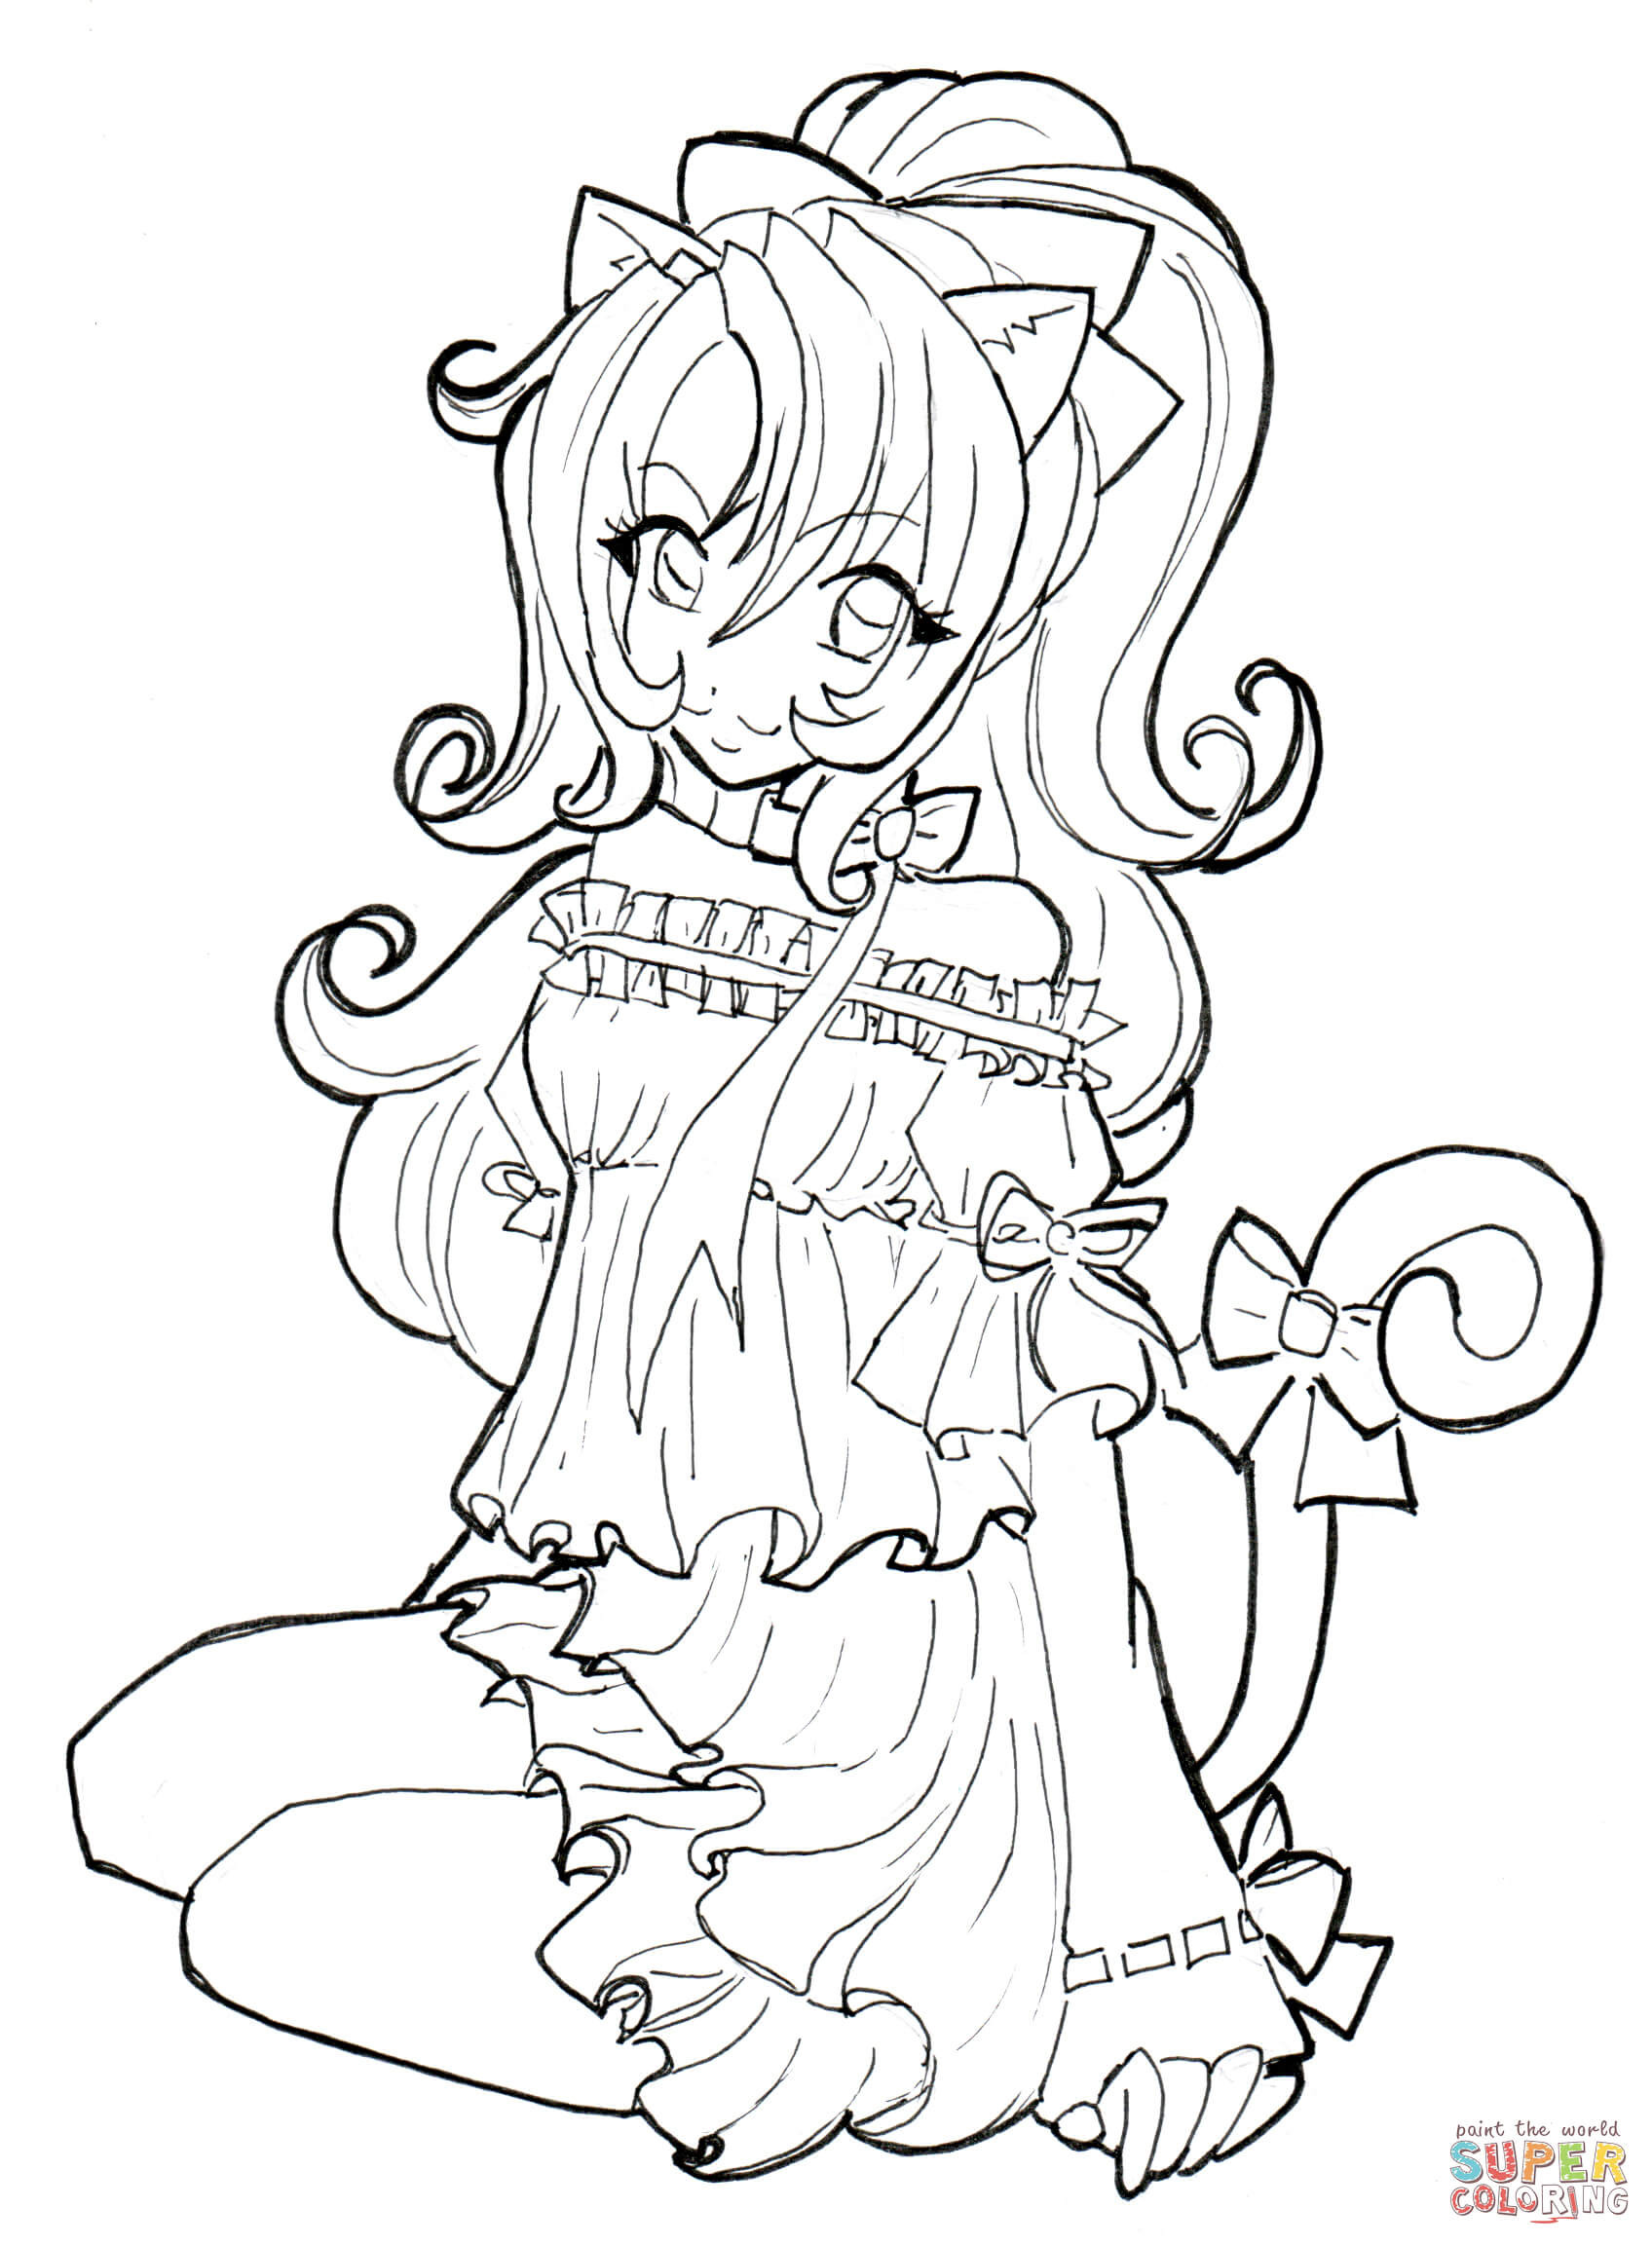 Coloring Pages For Girls 11 And Up Anime Griffens
 anime cat girl coloring pages